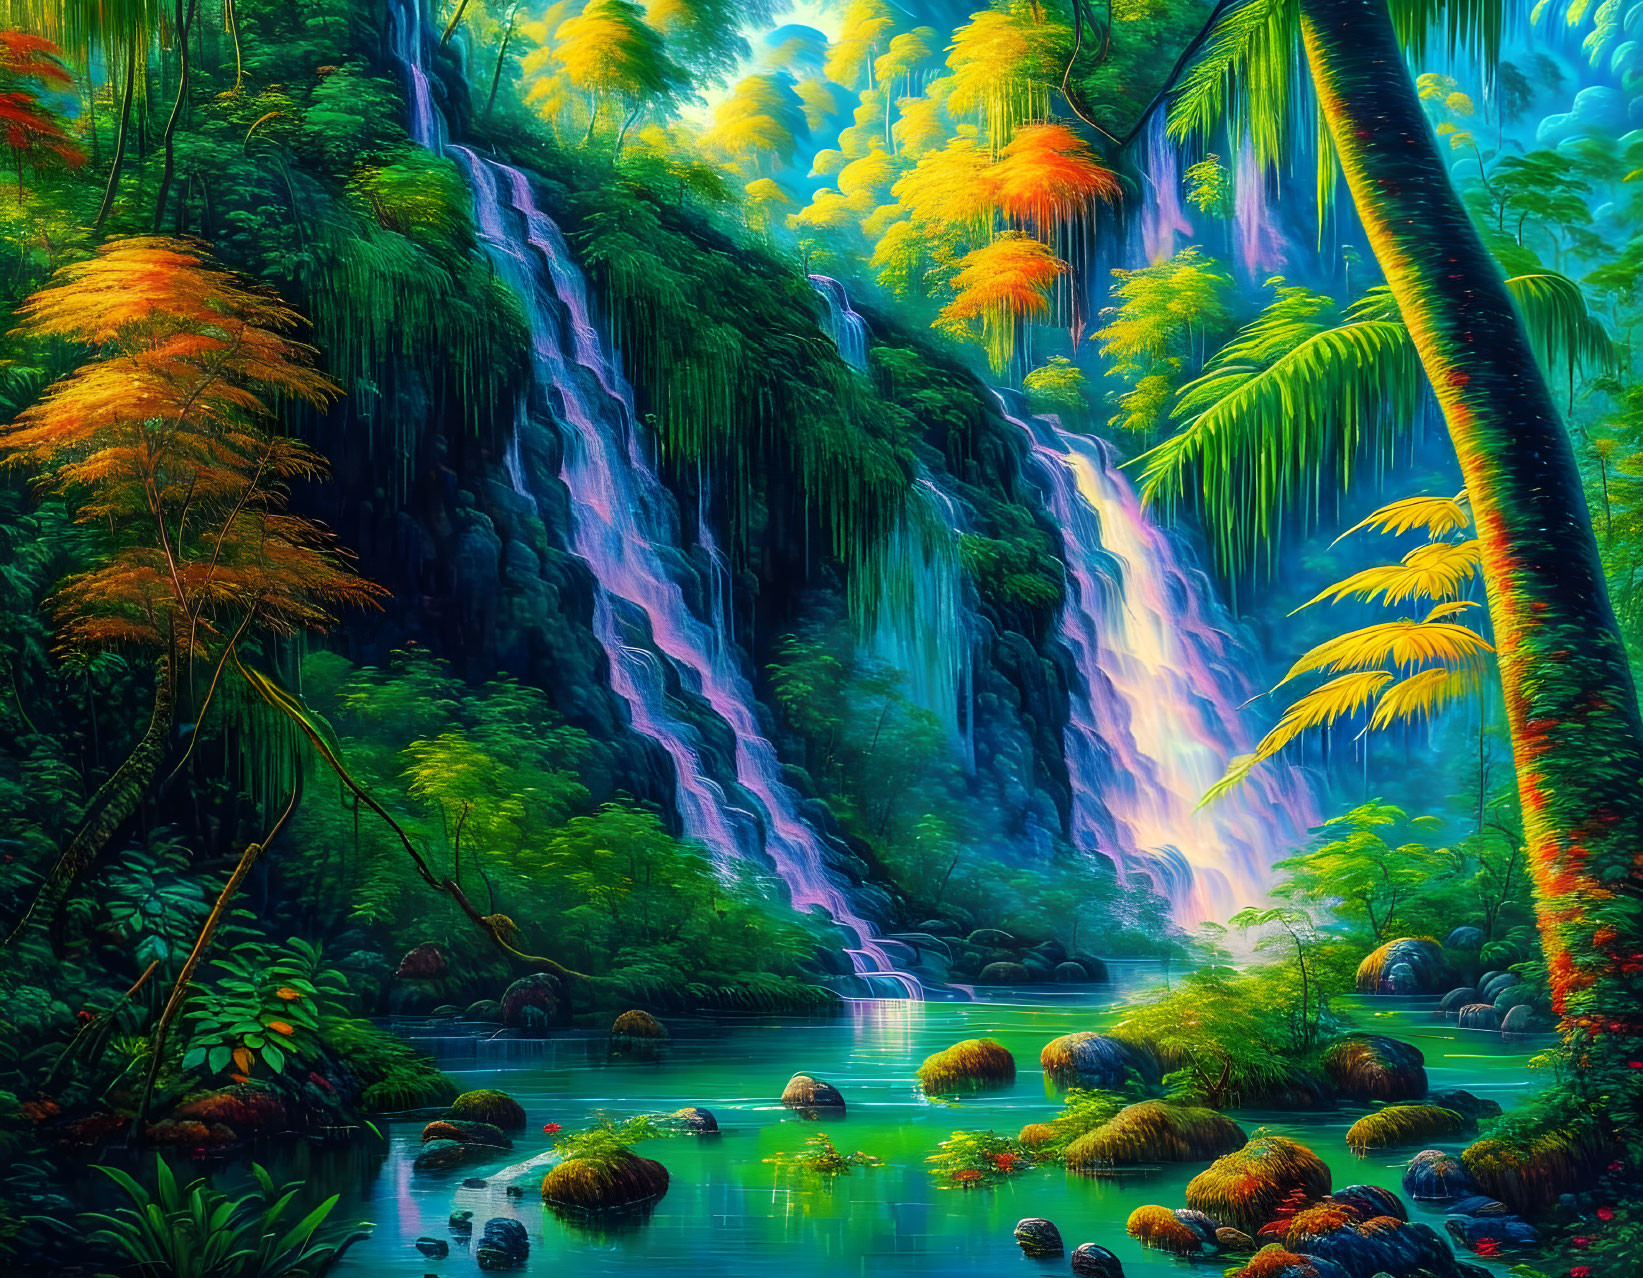 Tropical waterfall with lush greenery, serene pond, and illuminated canopy